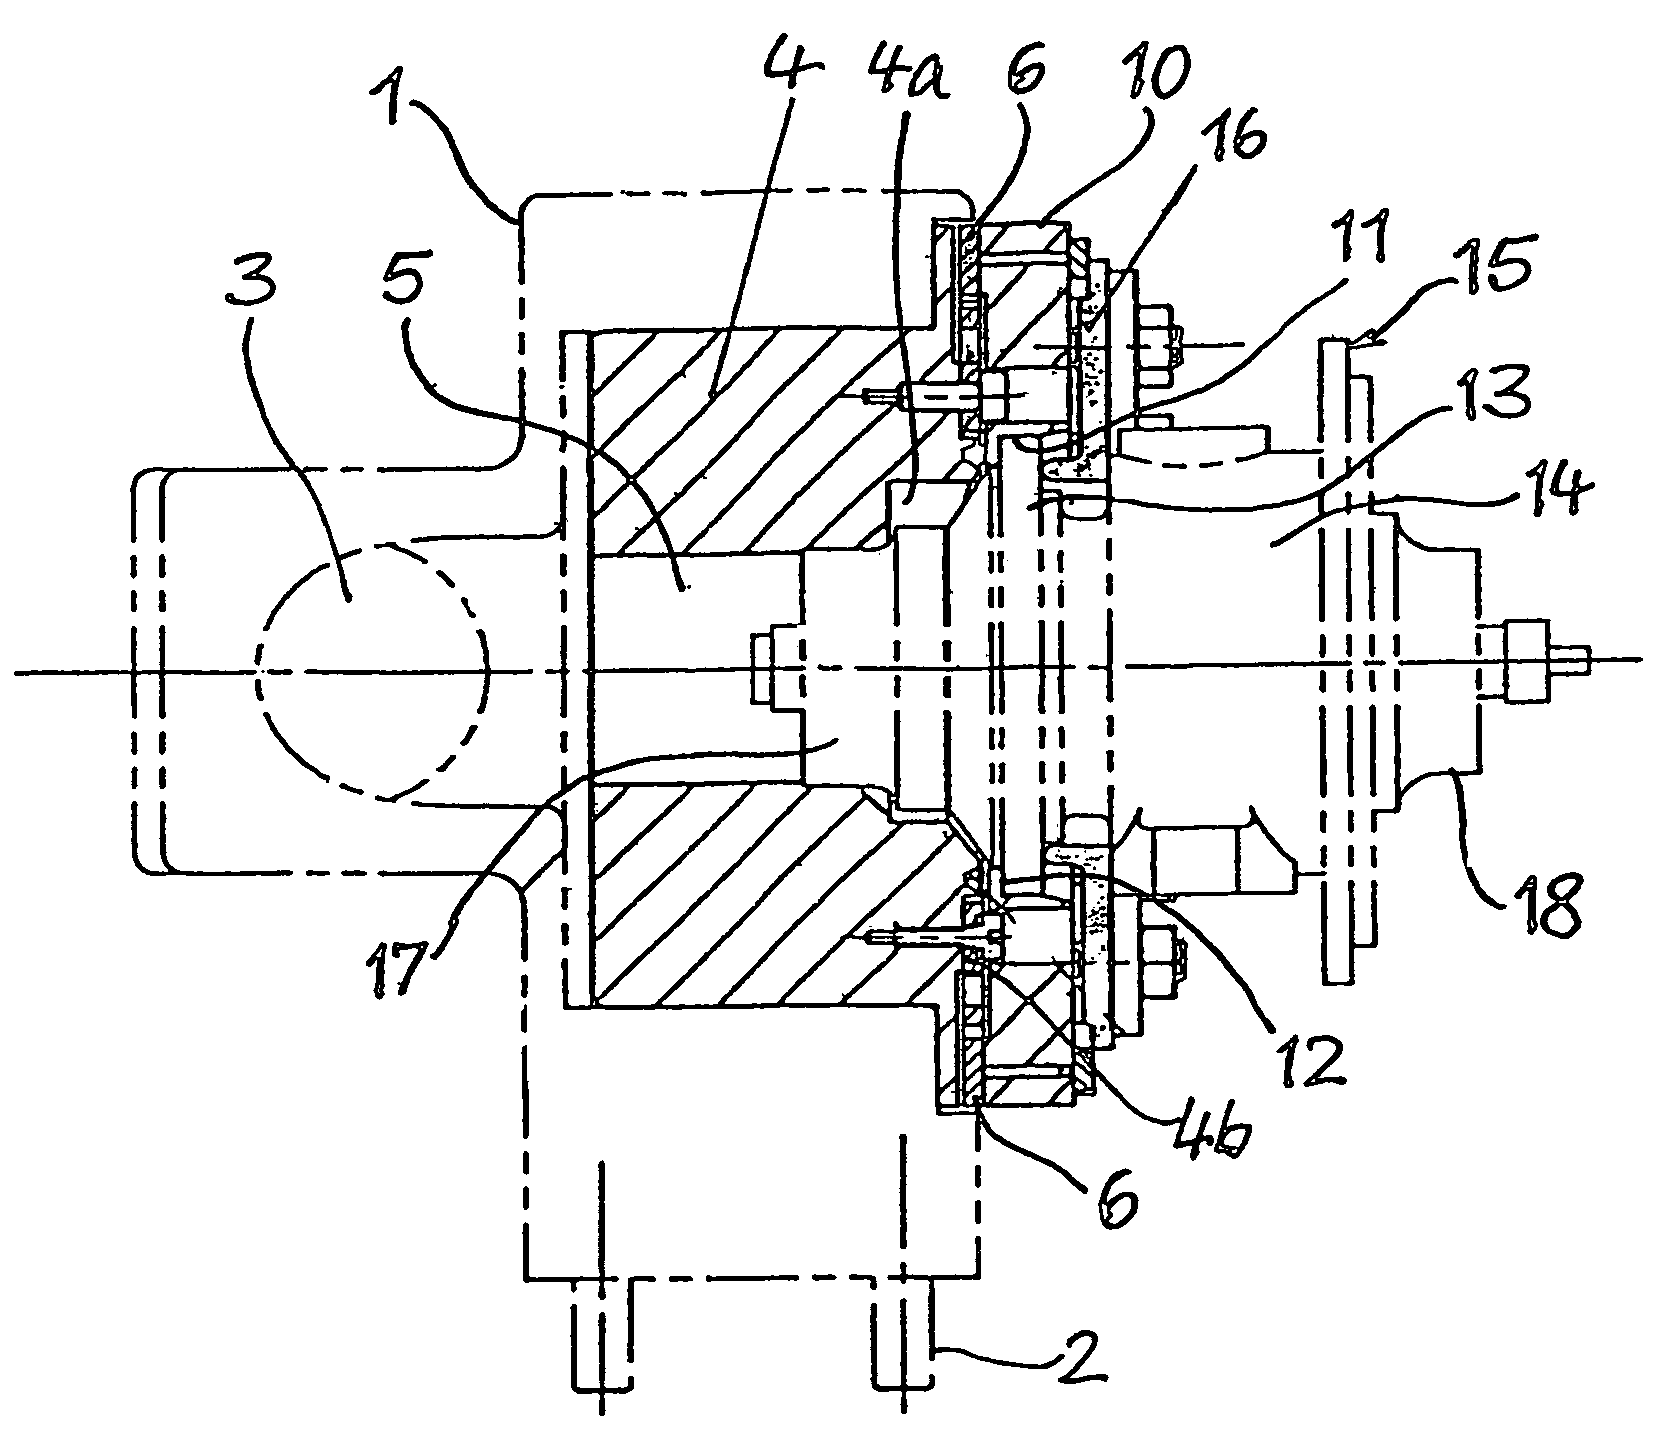 Method and device for dynamically measuring the unbalance of a rotor